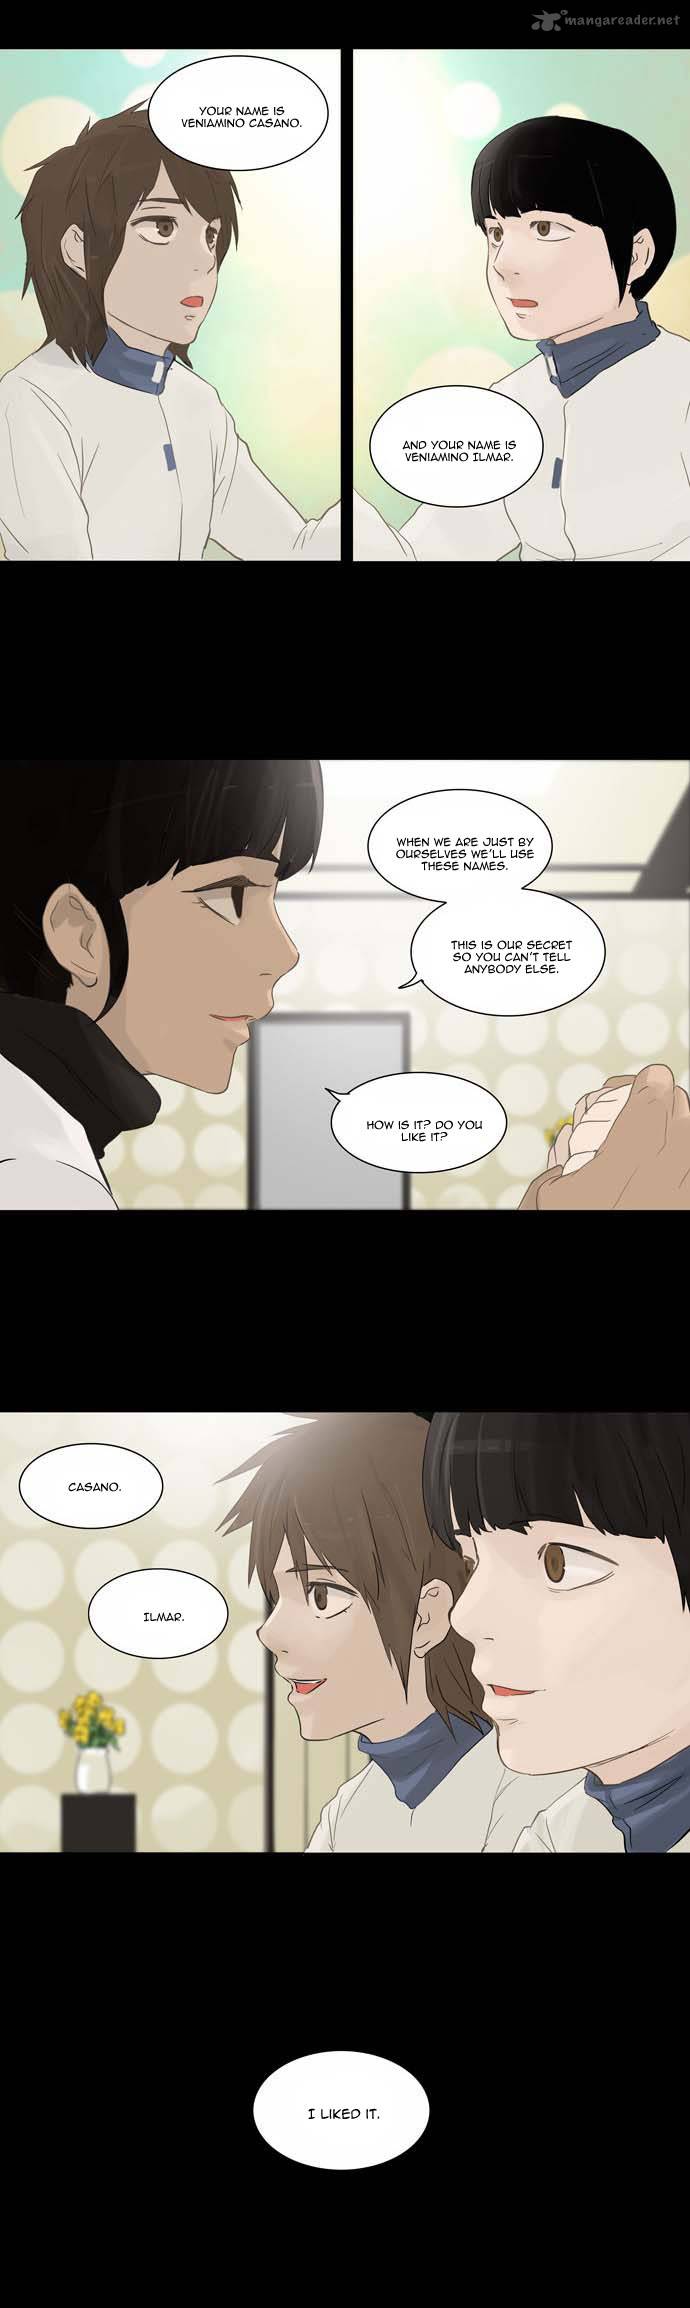 Tower Of God 122 12